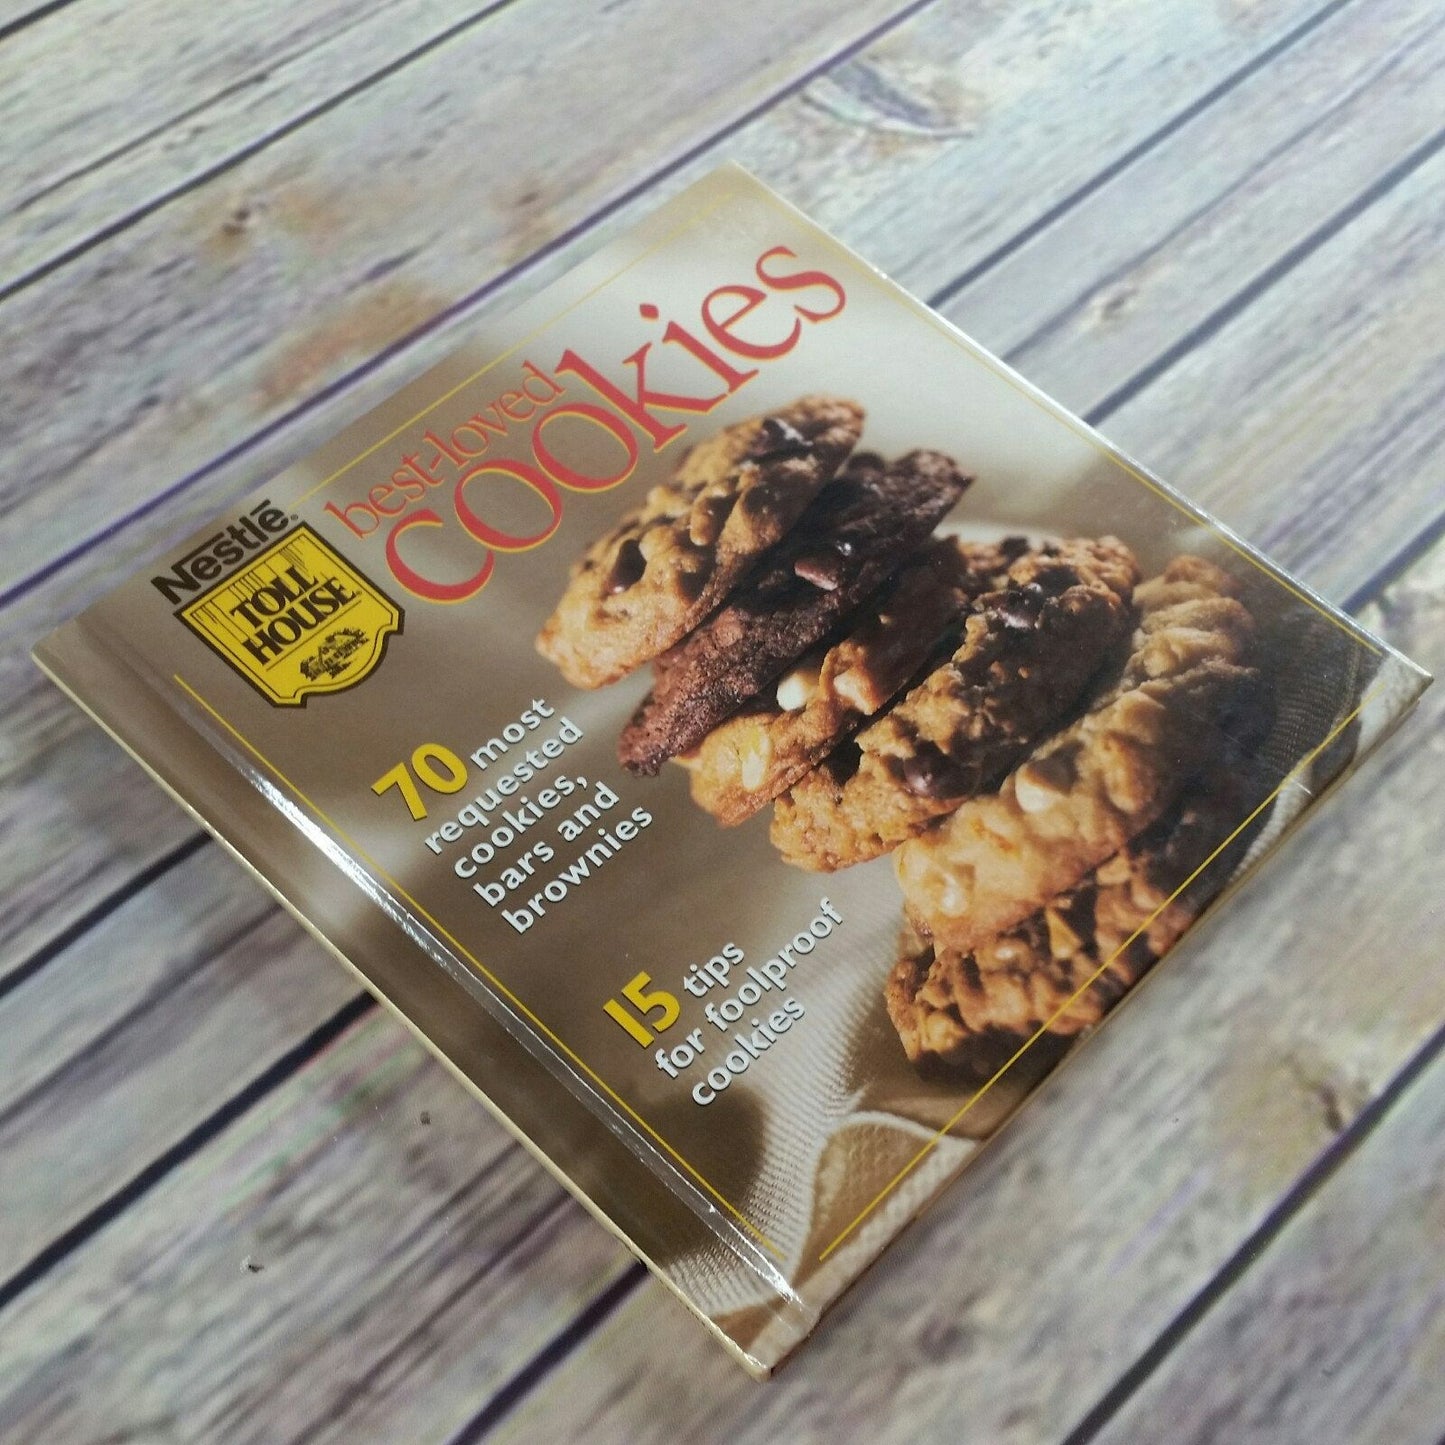 Vintage Cookbook Nestle Best Loved Cookies Toll House 1995 Cookies Recipes Hardcover NO Dust Jacket 70 Recipes